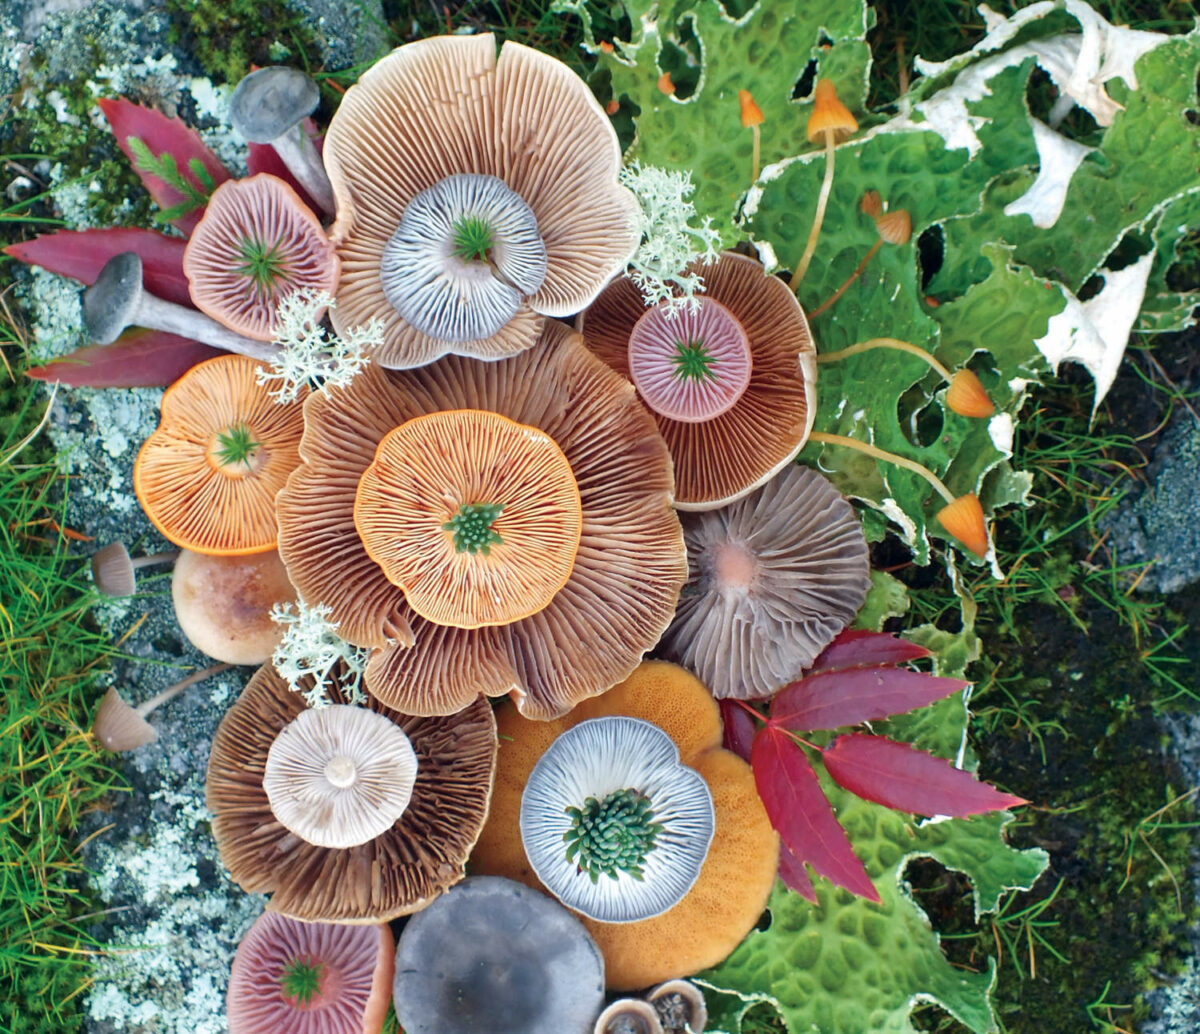 Colorful Arrangements Made Of Mushrooms By Jill Bliss 9